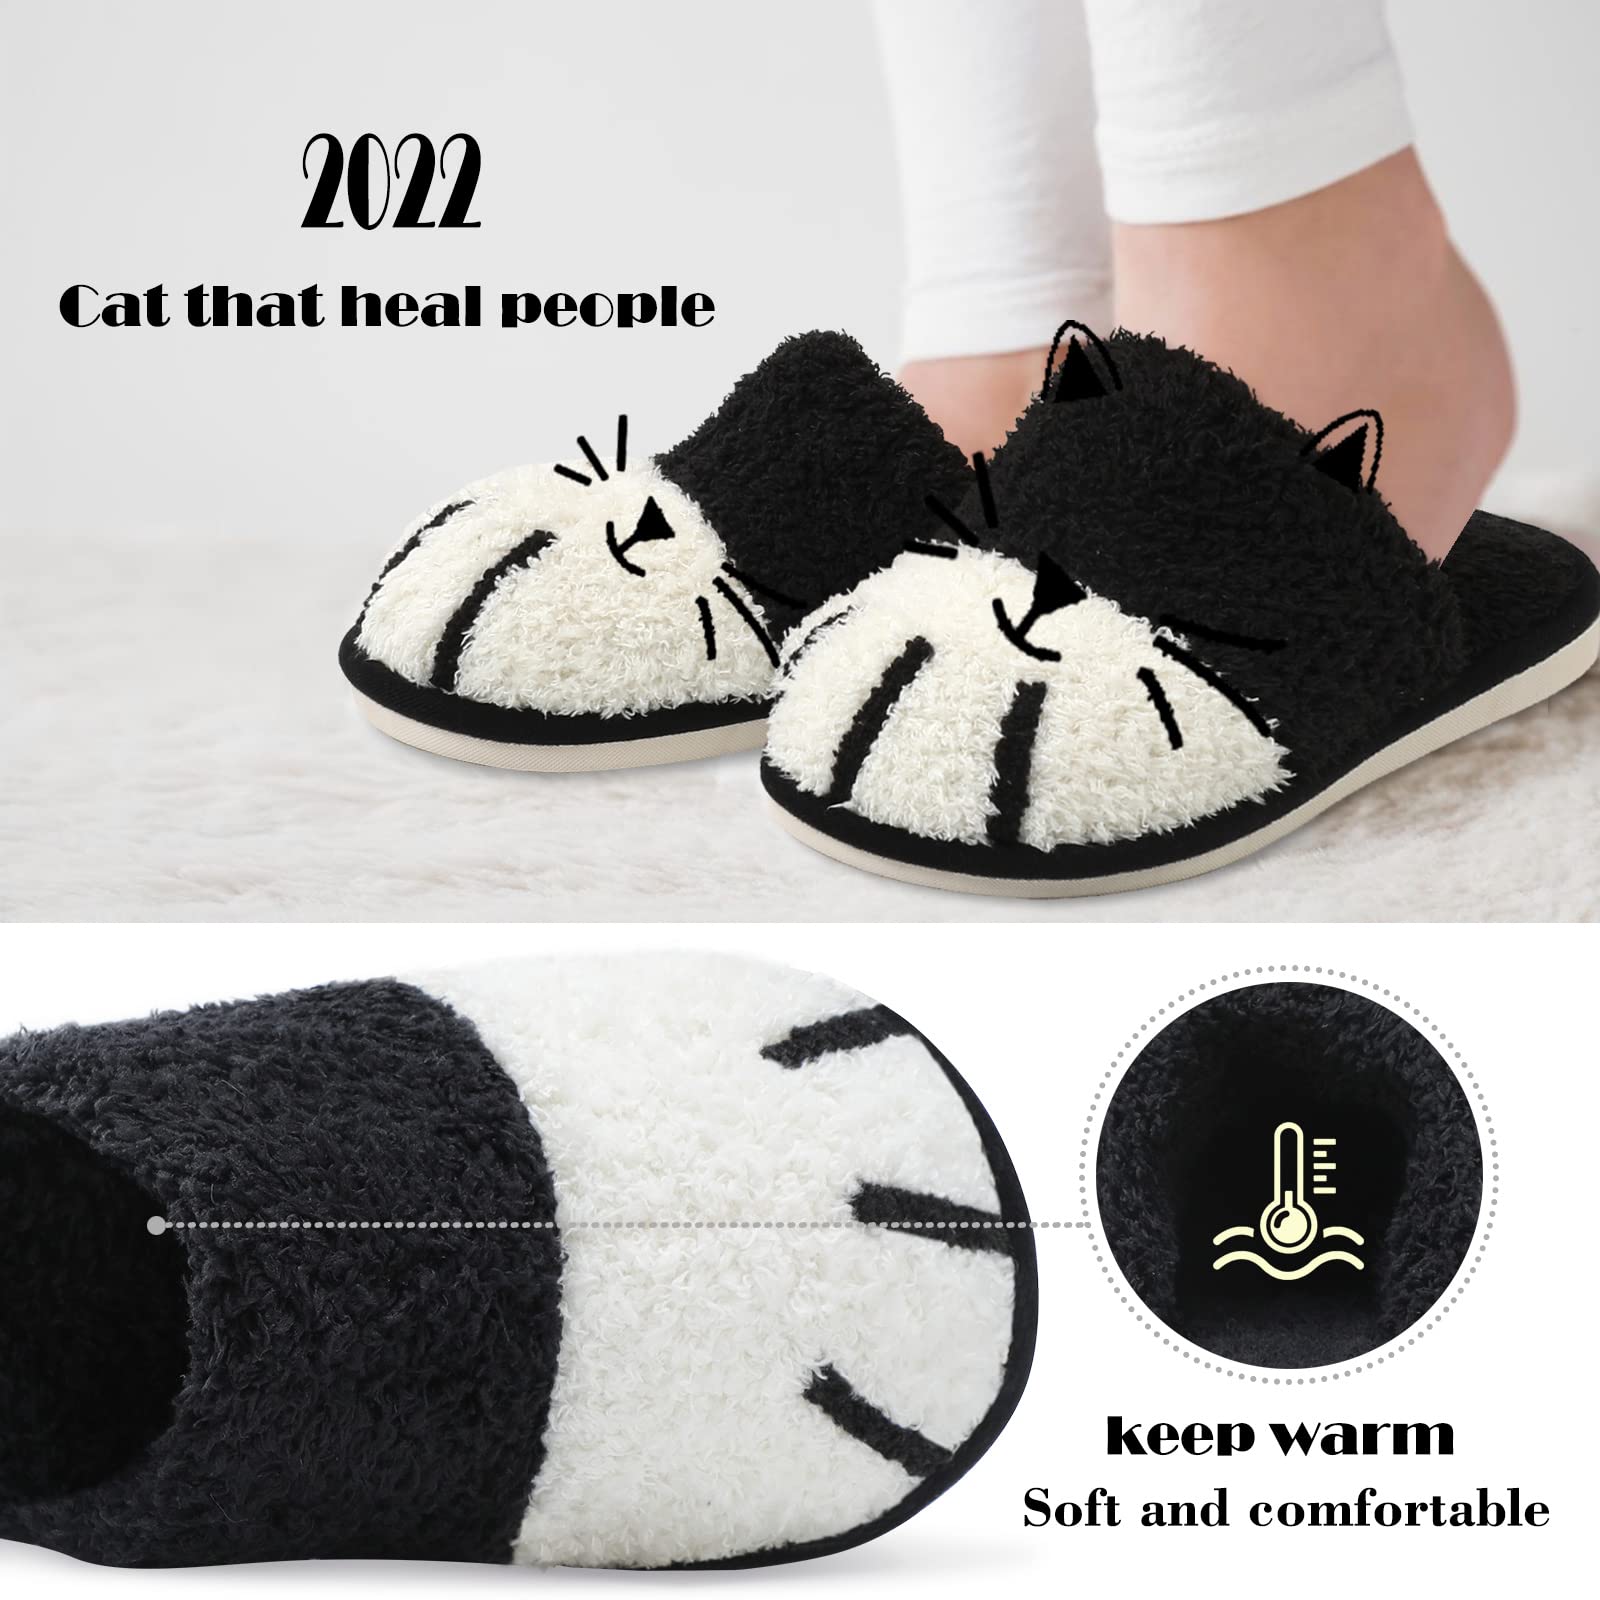 MAXTOP Cute Animal House Slippers for Women, Cozy Memory Foam Mens Slippers Soft Warm Slip, Anti-Skid Rubber Sole,Creative Gifts for Women Mom Girlfriend